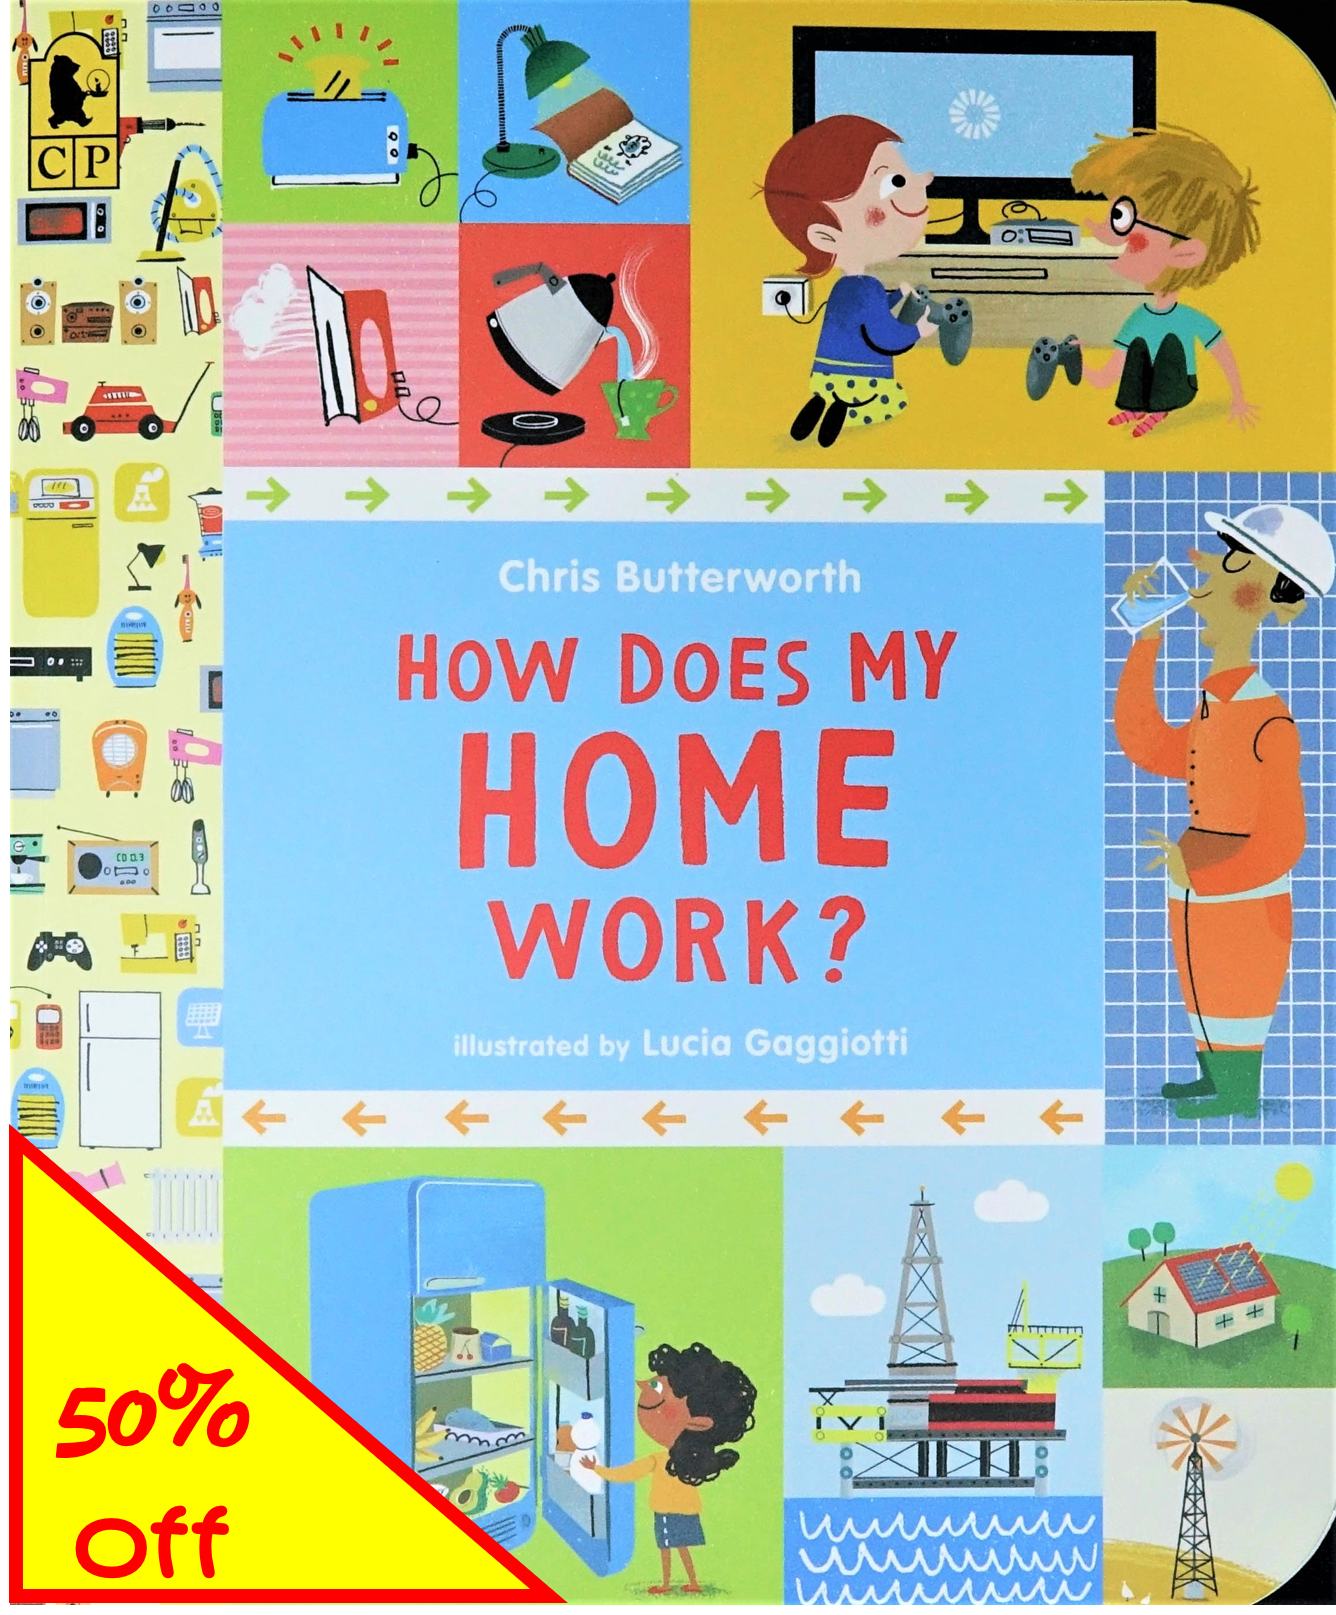 How does my home work？